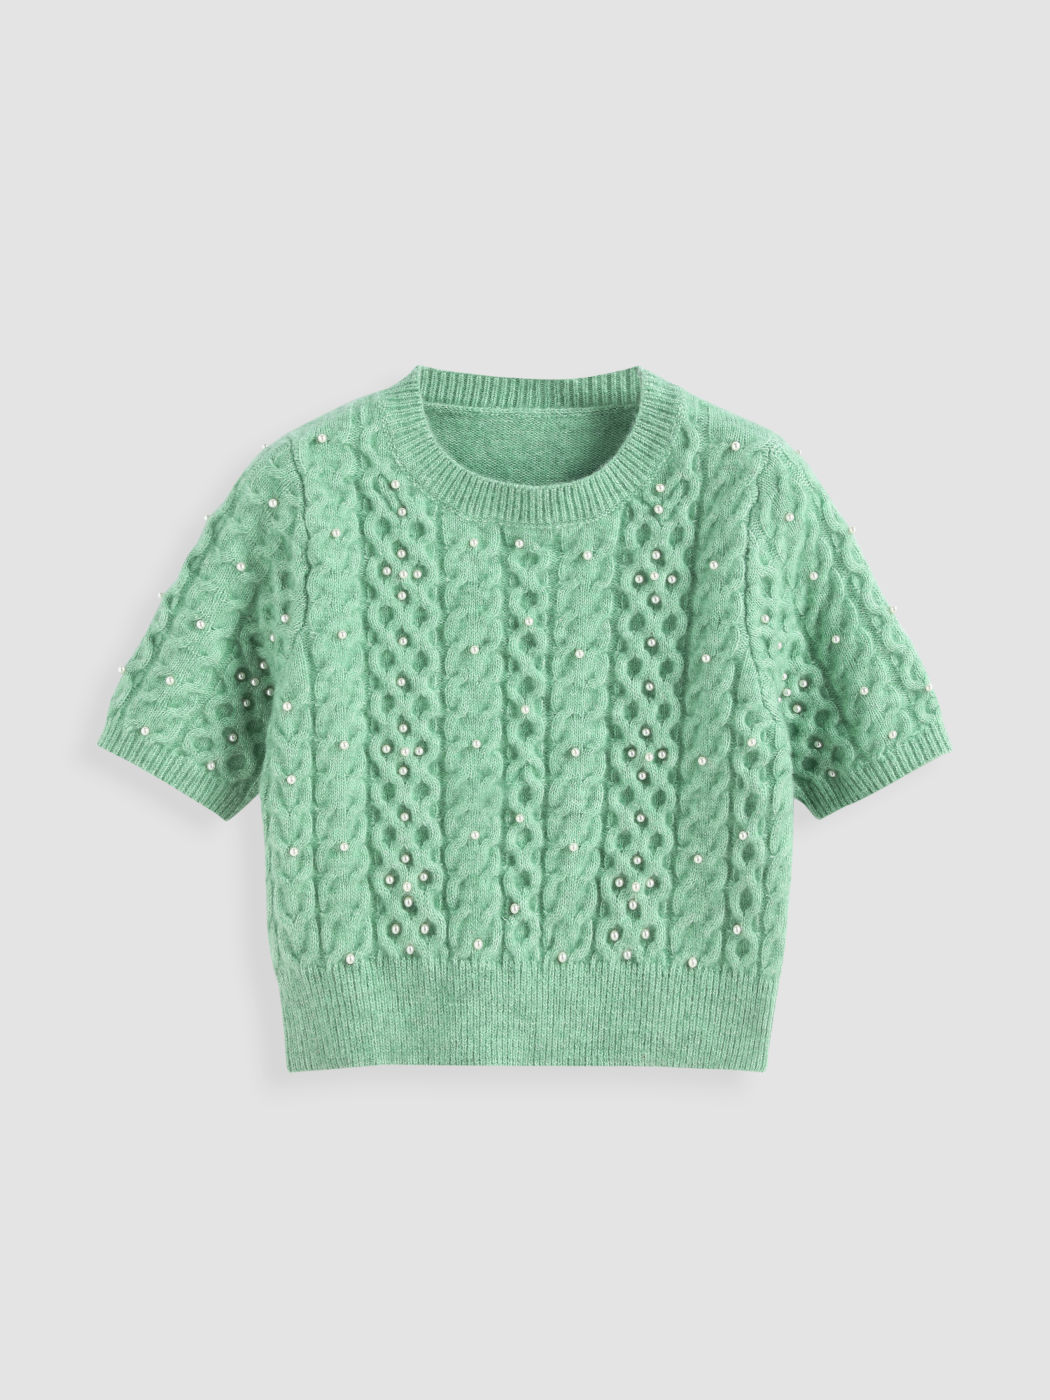 Solid Cable Knit Beaded Top - Cider